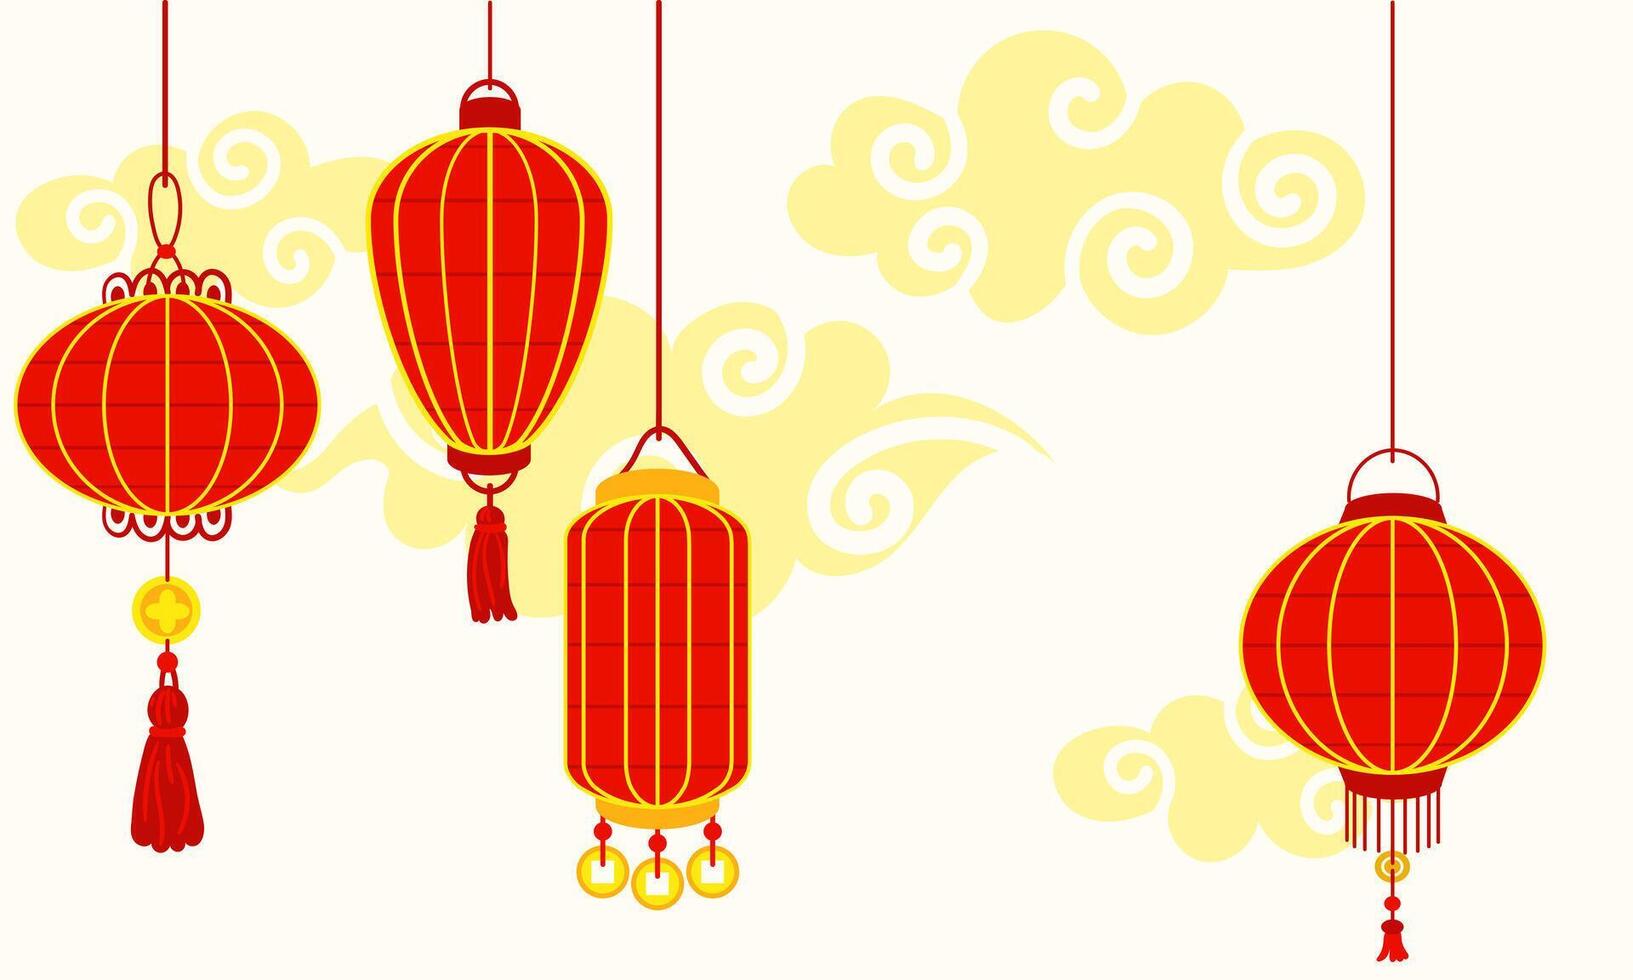 Chinese red paper lanterns hang in a row against of clouds, reminiscent of cultural wealth and a festive atmosphere. A festival for good luck. Festive themes, cultural presentations. Moon Festival vector